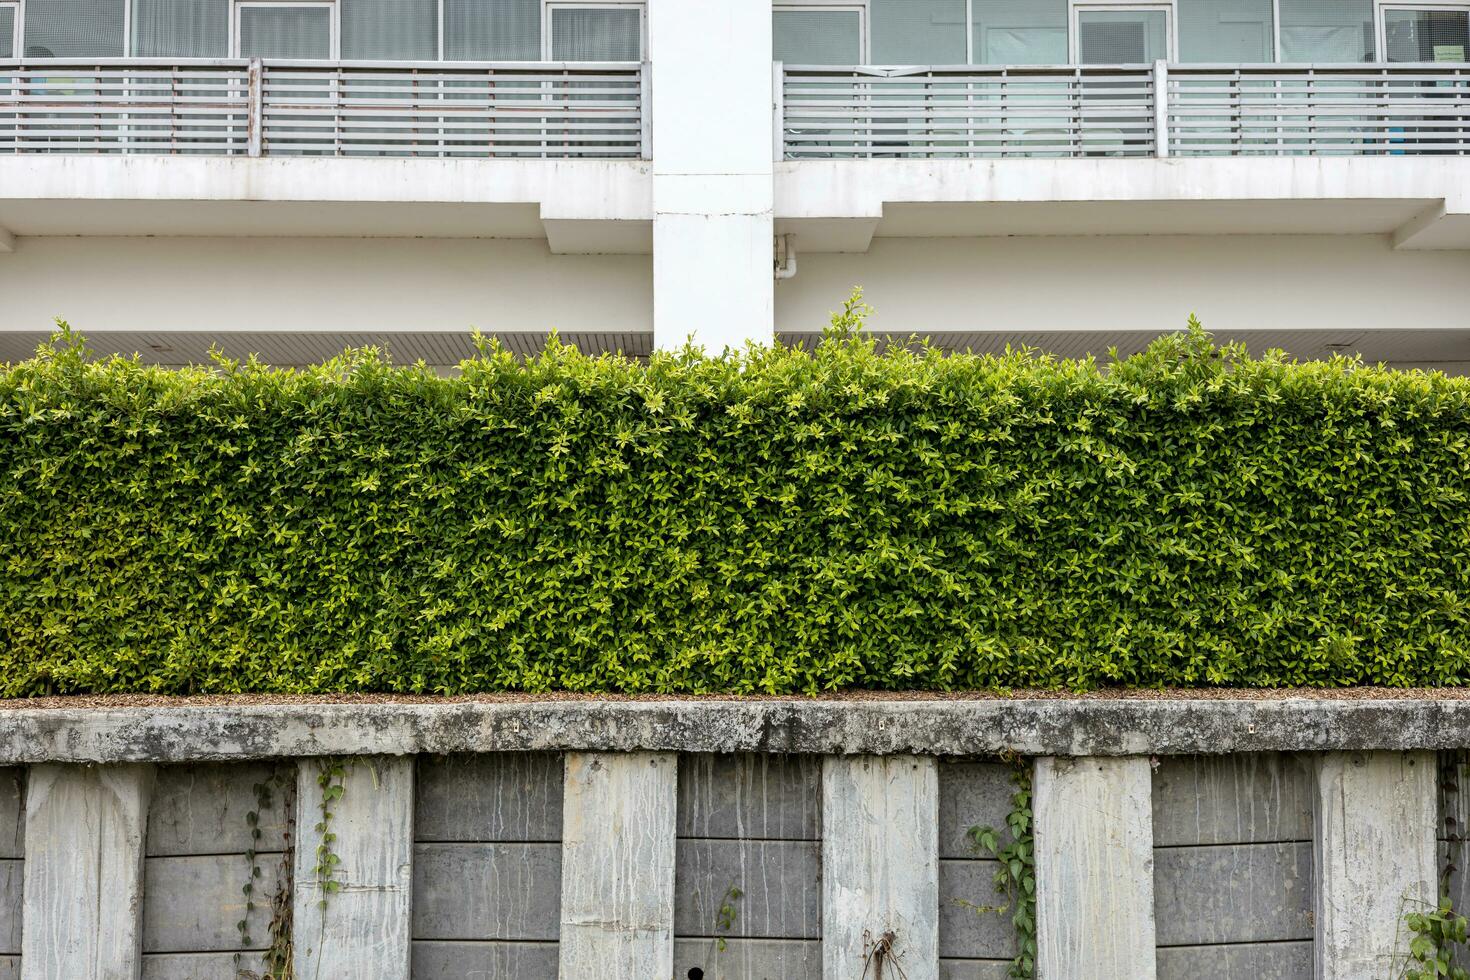 The view behind a wall of green hedges stretches on a concrete embankment platform. photo